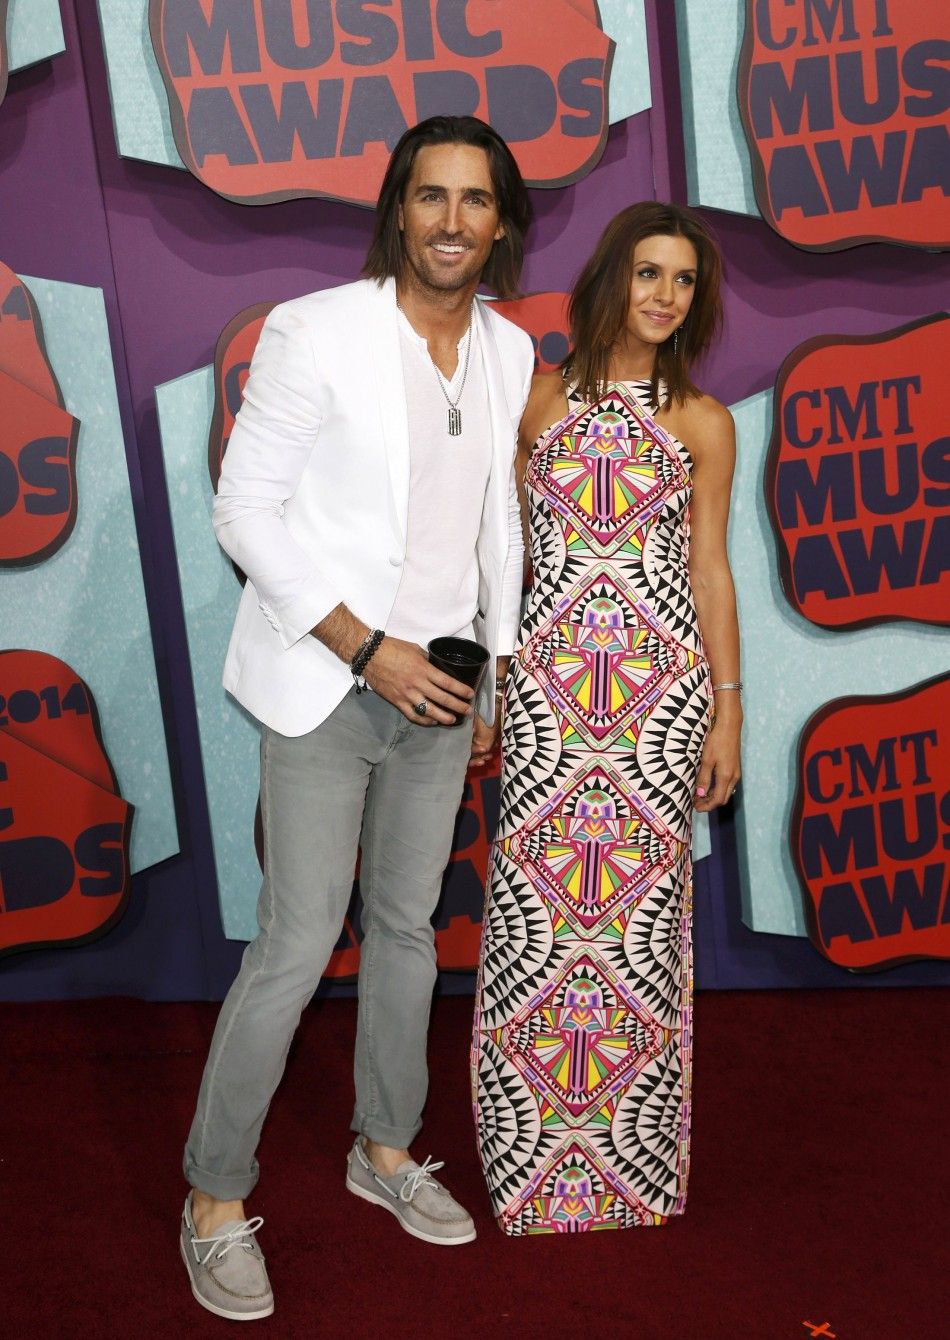 Musician Jake Owen and wife Lacey Buchanan arrive at the 2014 CMT Music Awards in Nashville